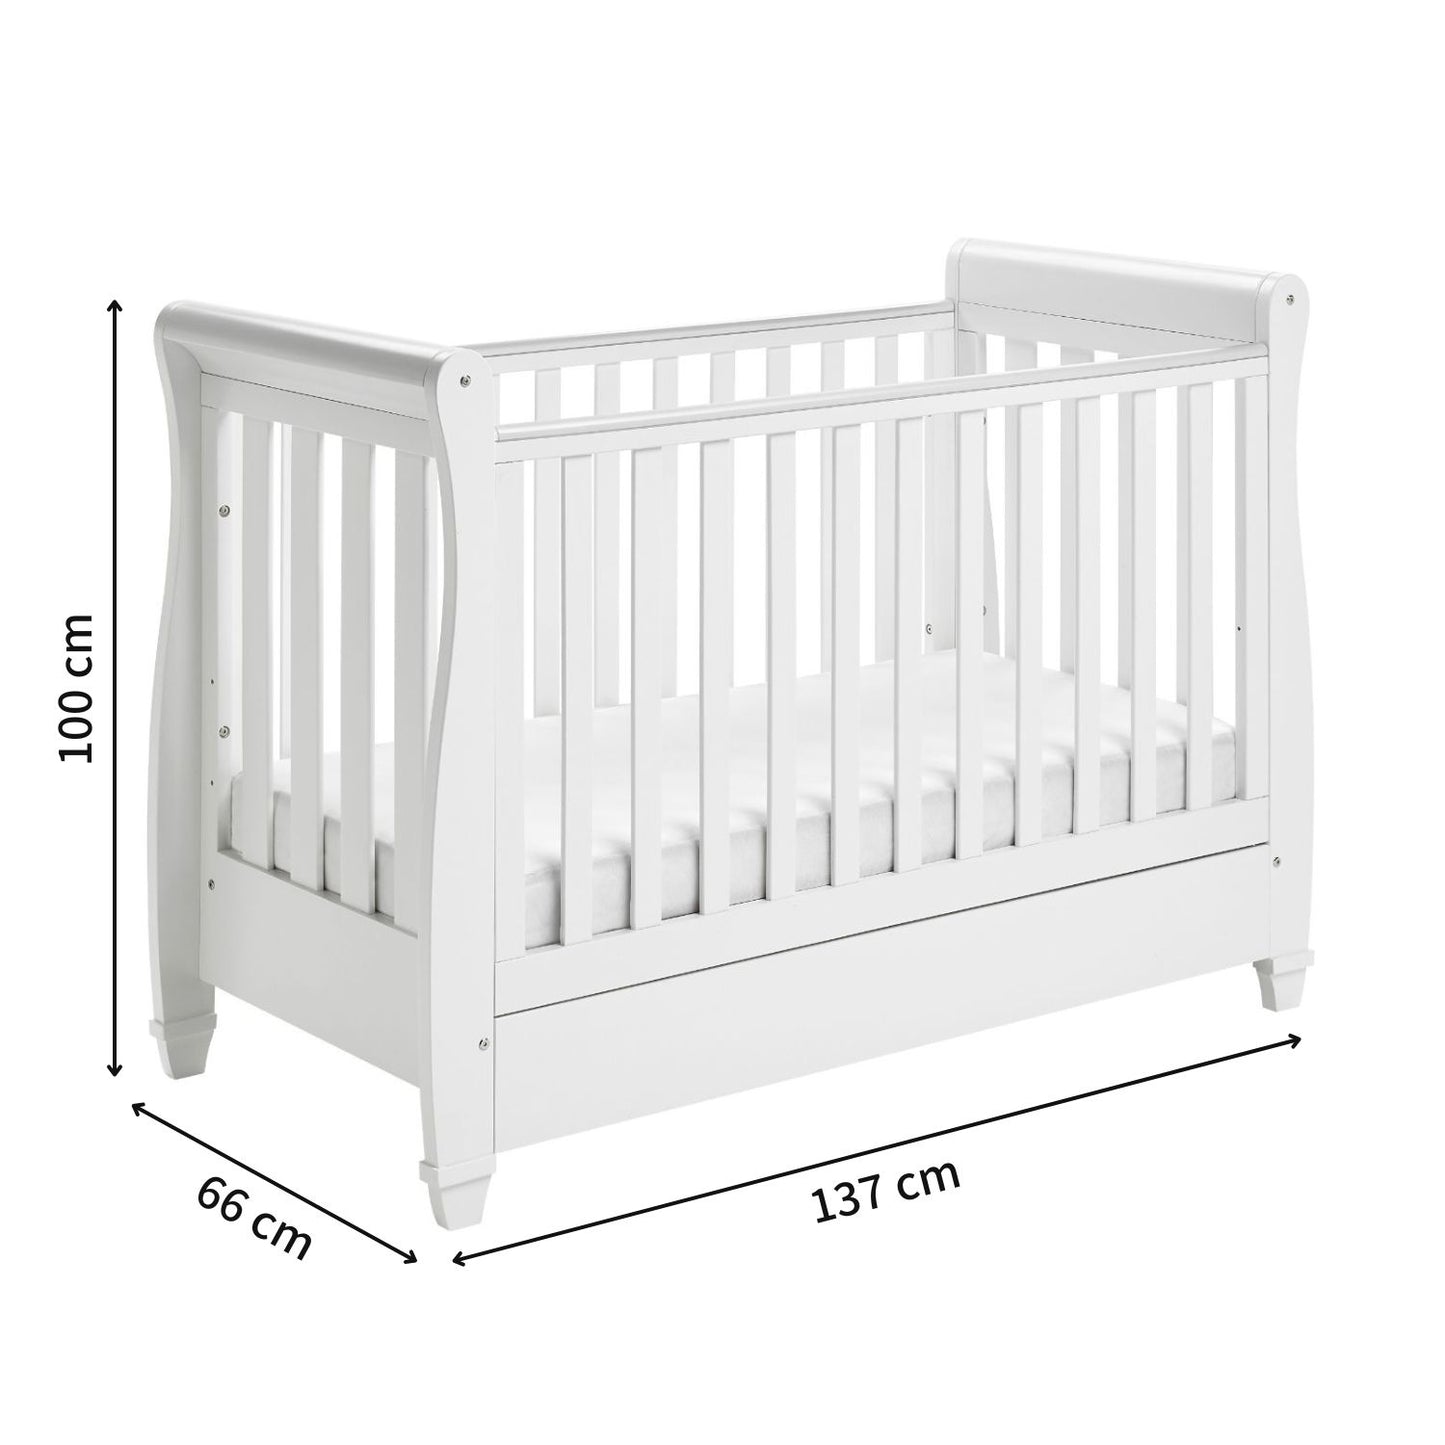 Babymore 2-in-1 Eva Sleigh Drop Side Cot Bed With Drawer Storage (0-4yrs)